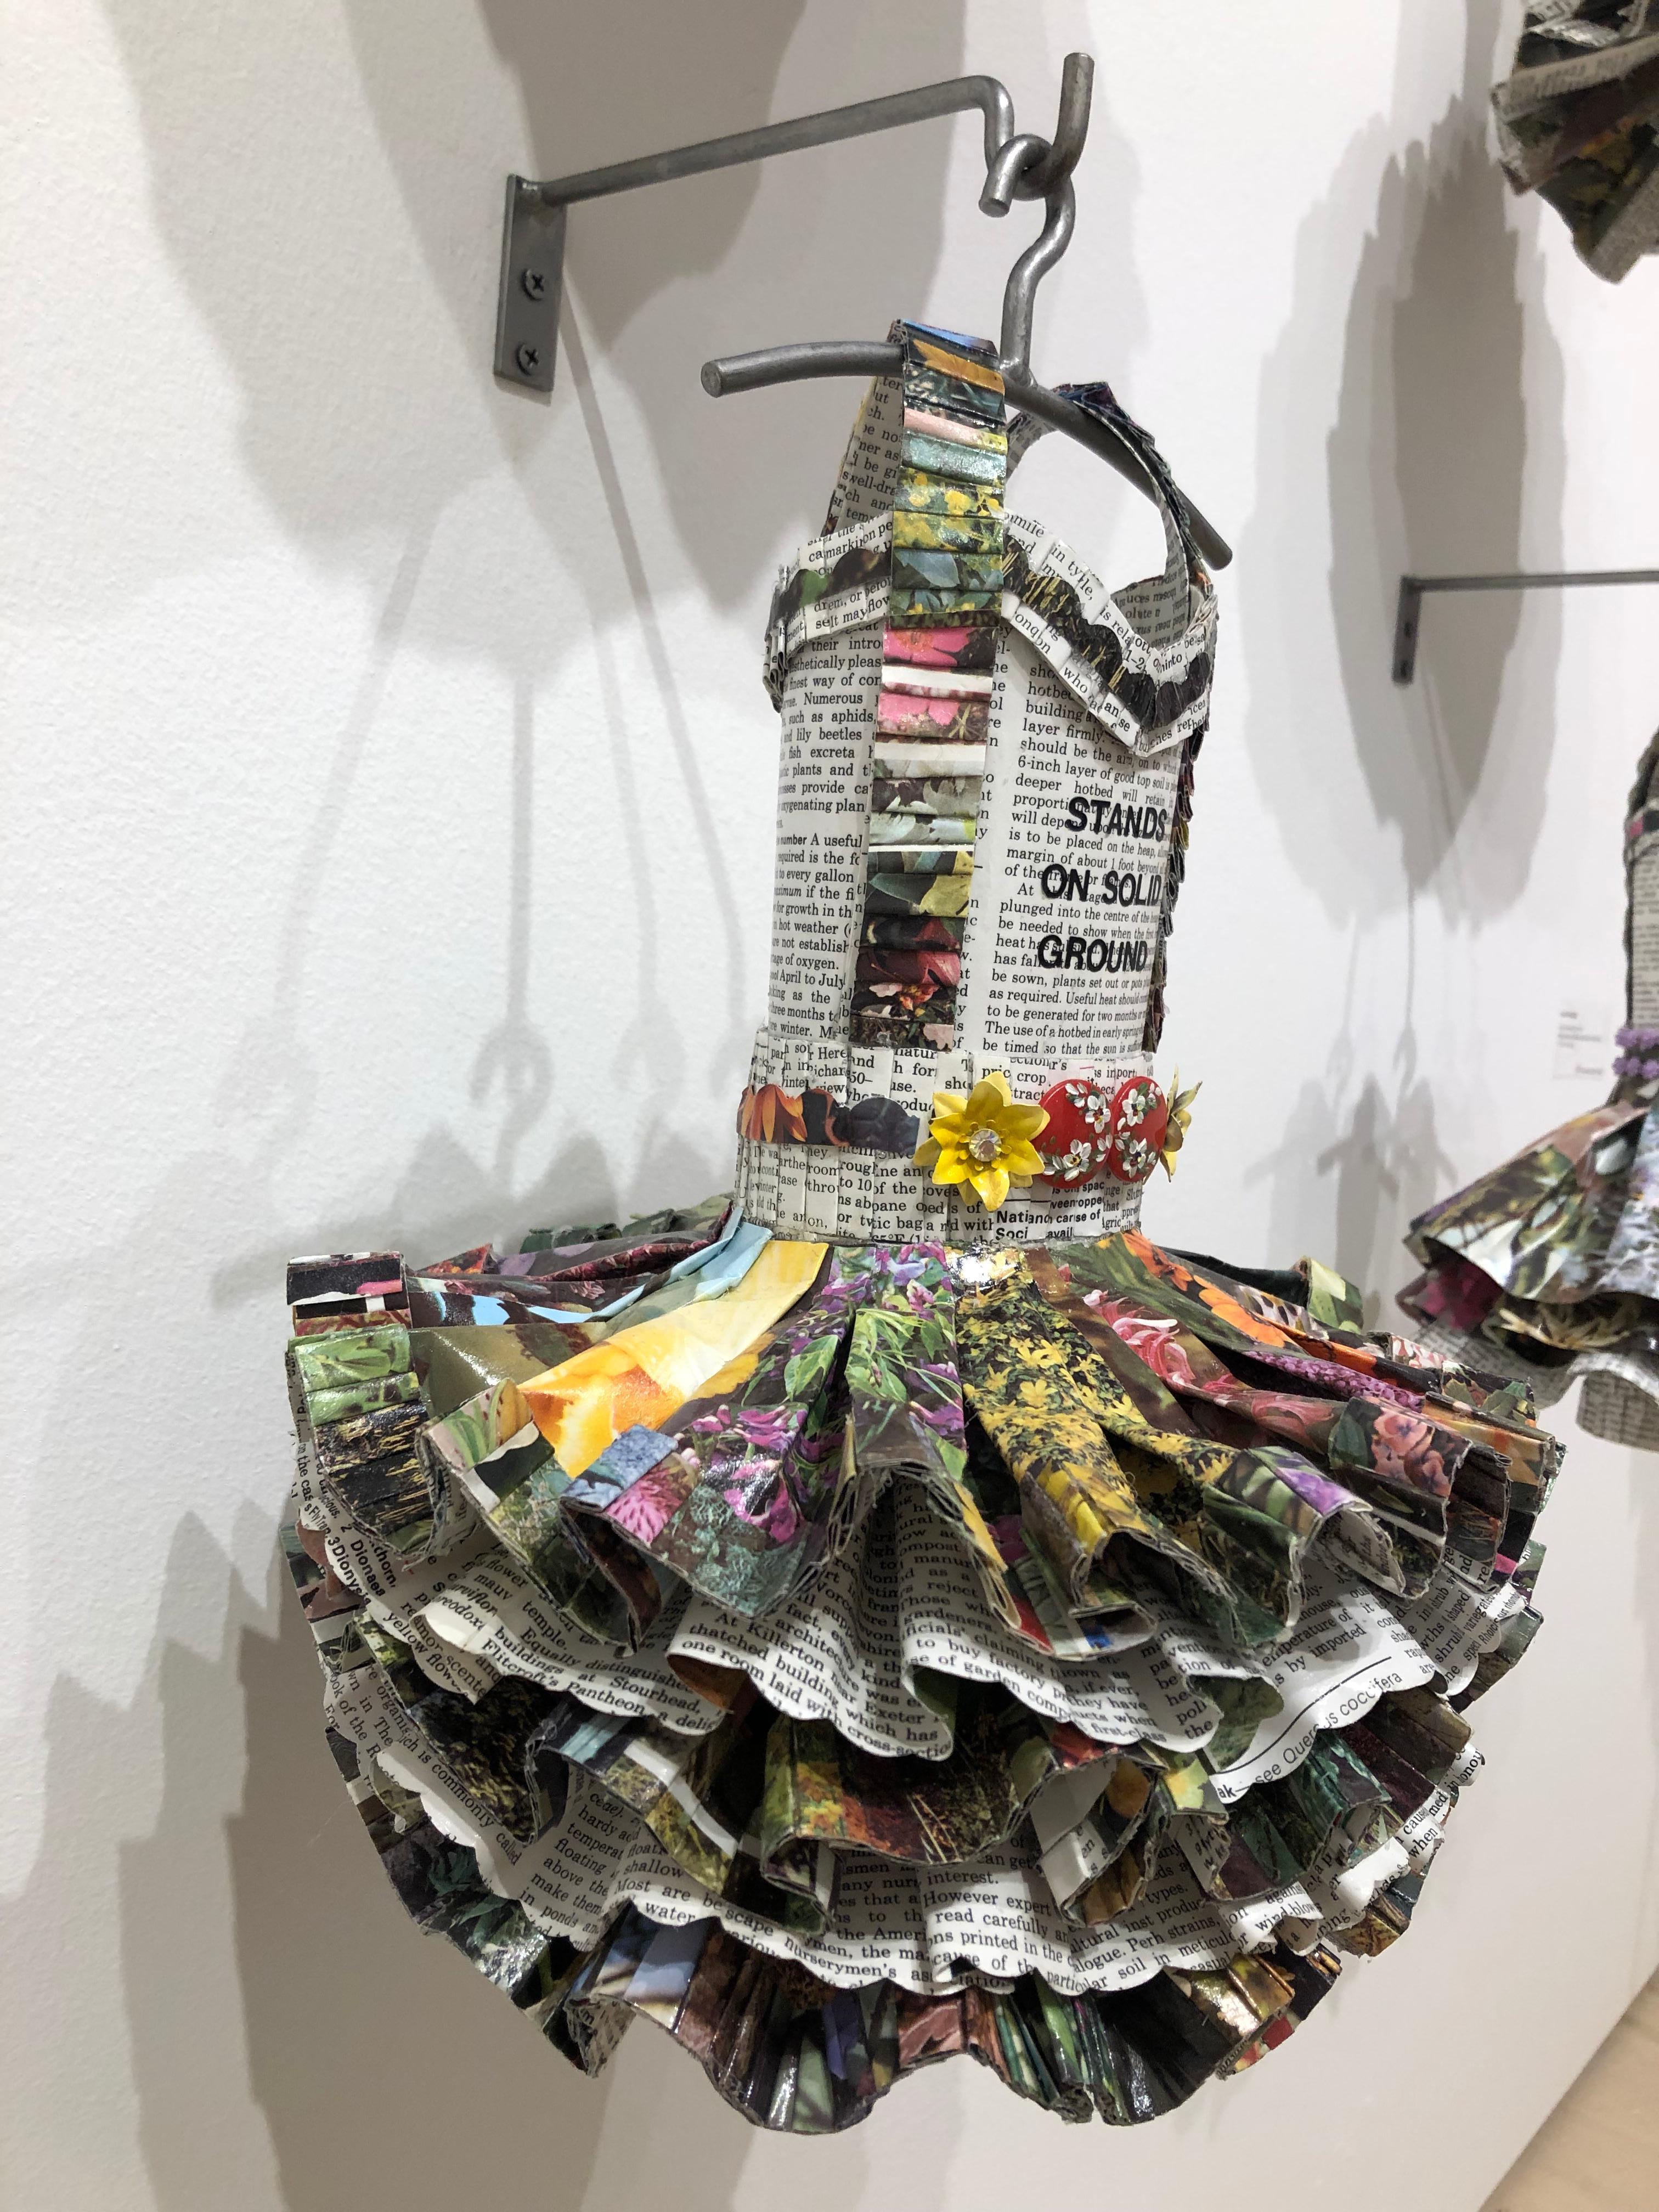 Dress sculpture made of vintage botanical books and trim. Paper features flowers and botanical text.
Stands on Solid Ground, from the Forces of Nature series
17 x 10.5 x 10 in.

New York-based artist Donna Rosenthal explores the effects of